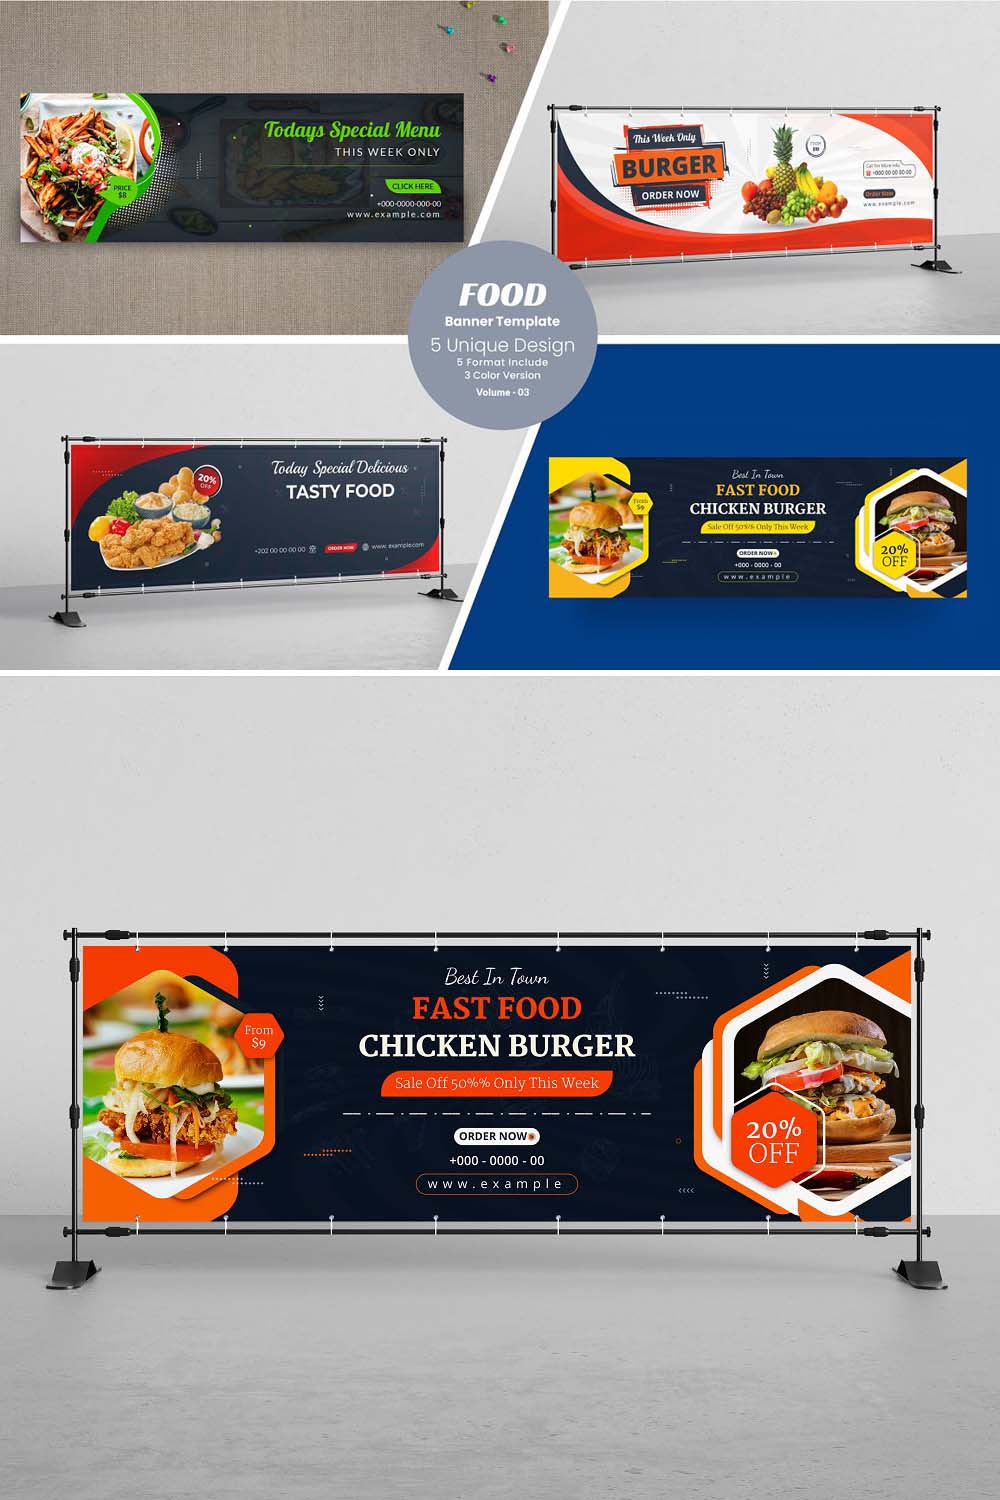 Food Banners Sliders & Feature pinterest preview image.